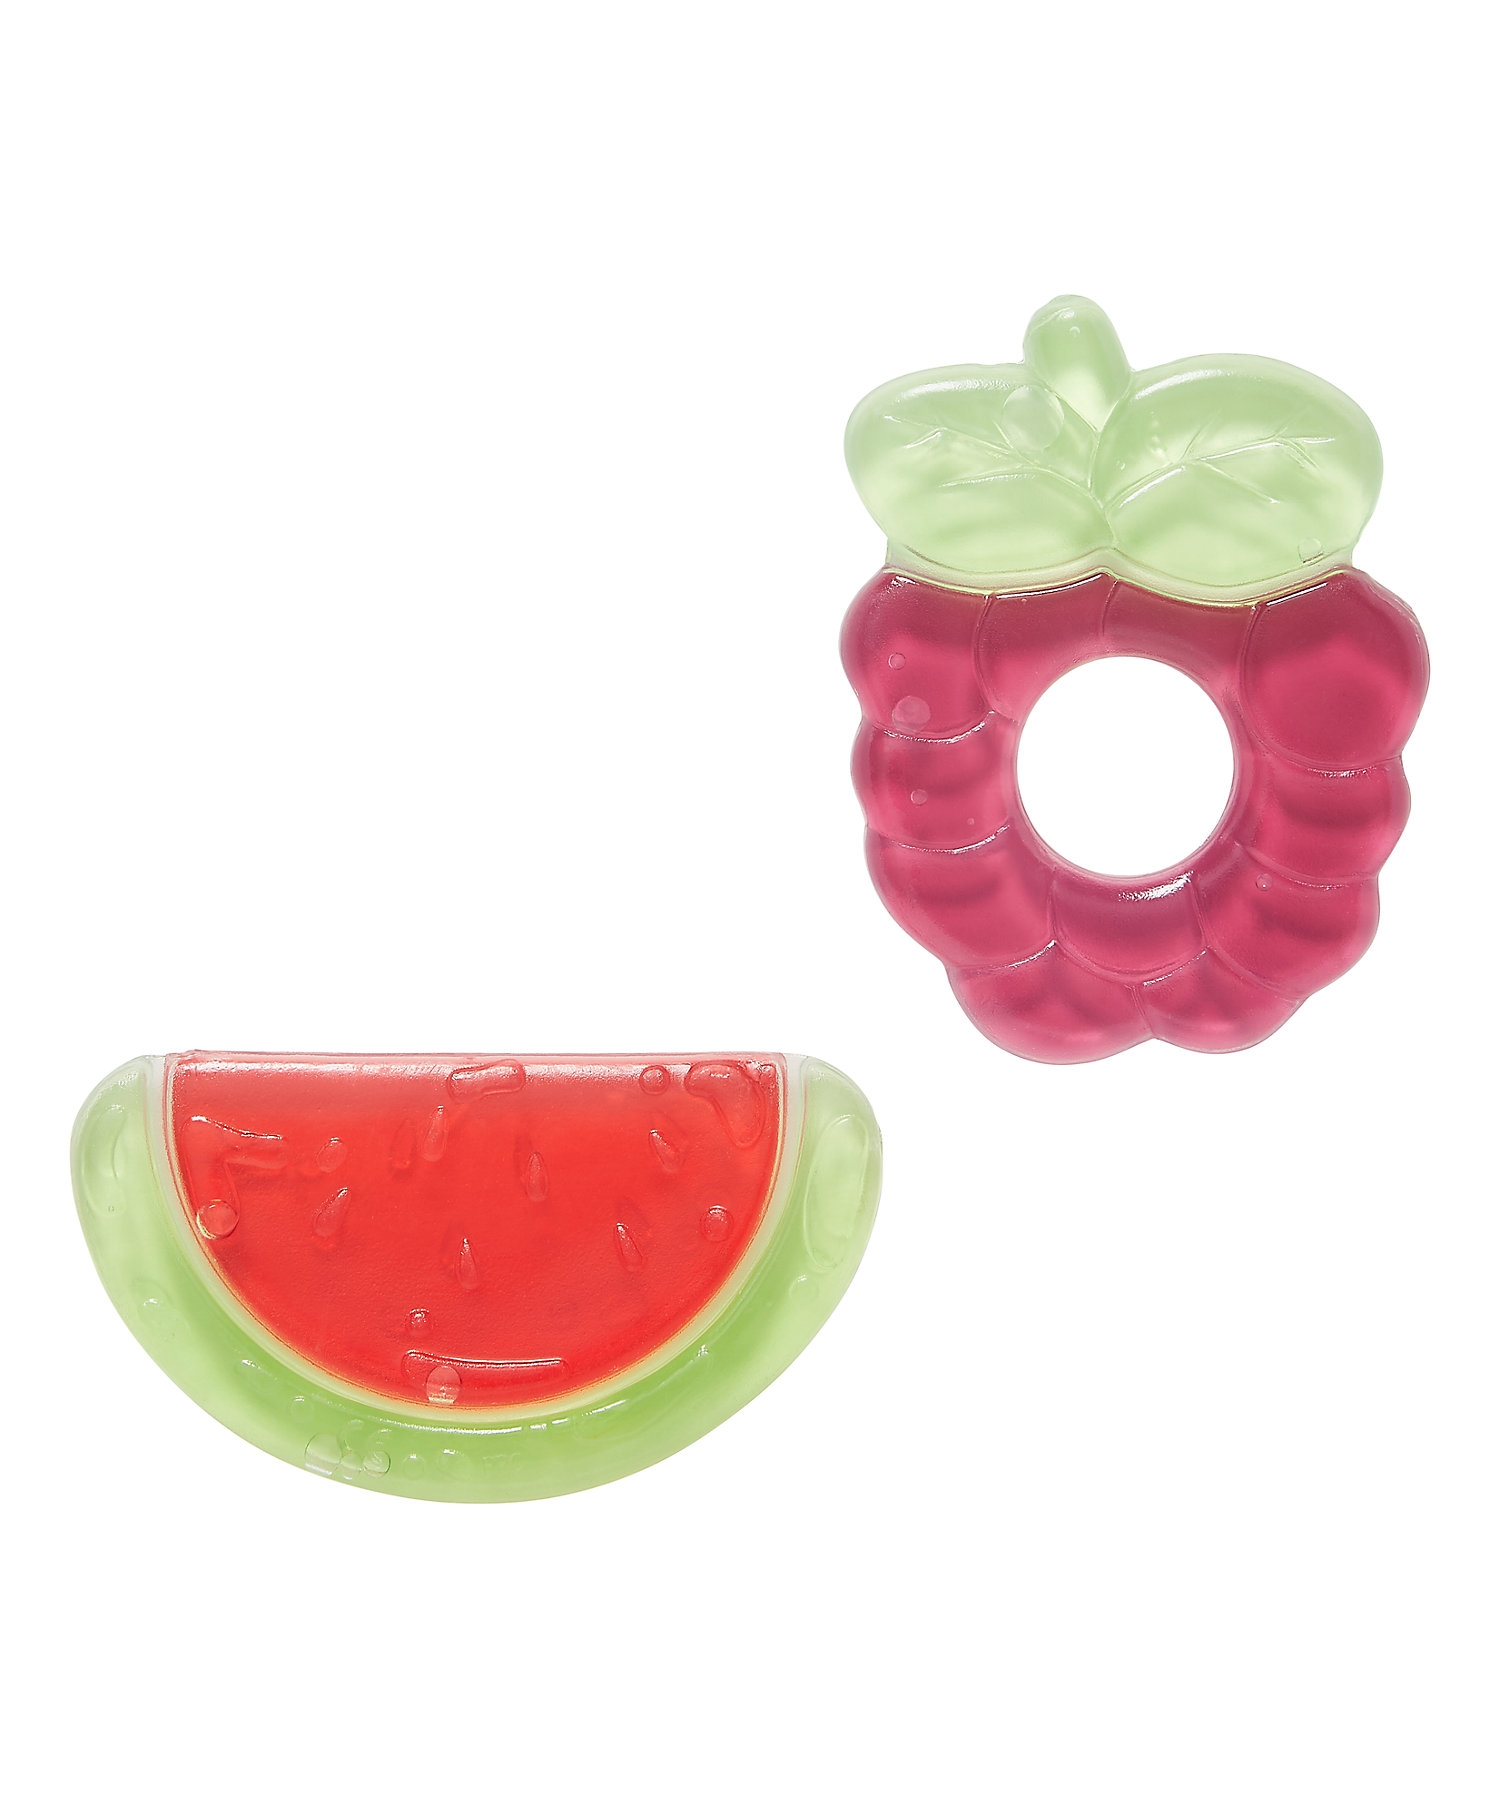 Mothercare | Grape and Melon Teethers - Pack of 2